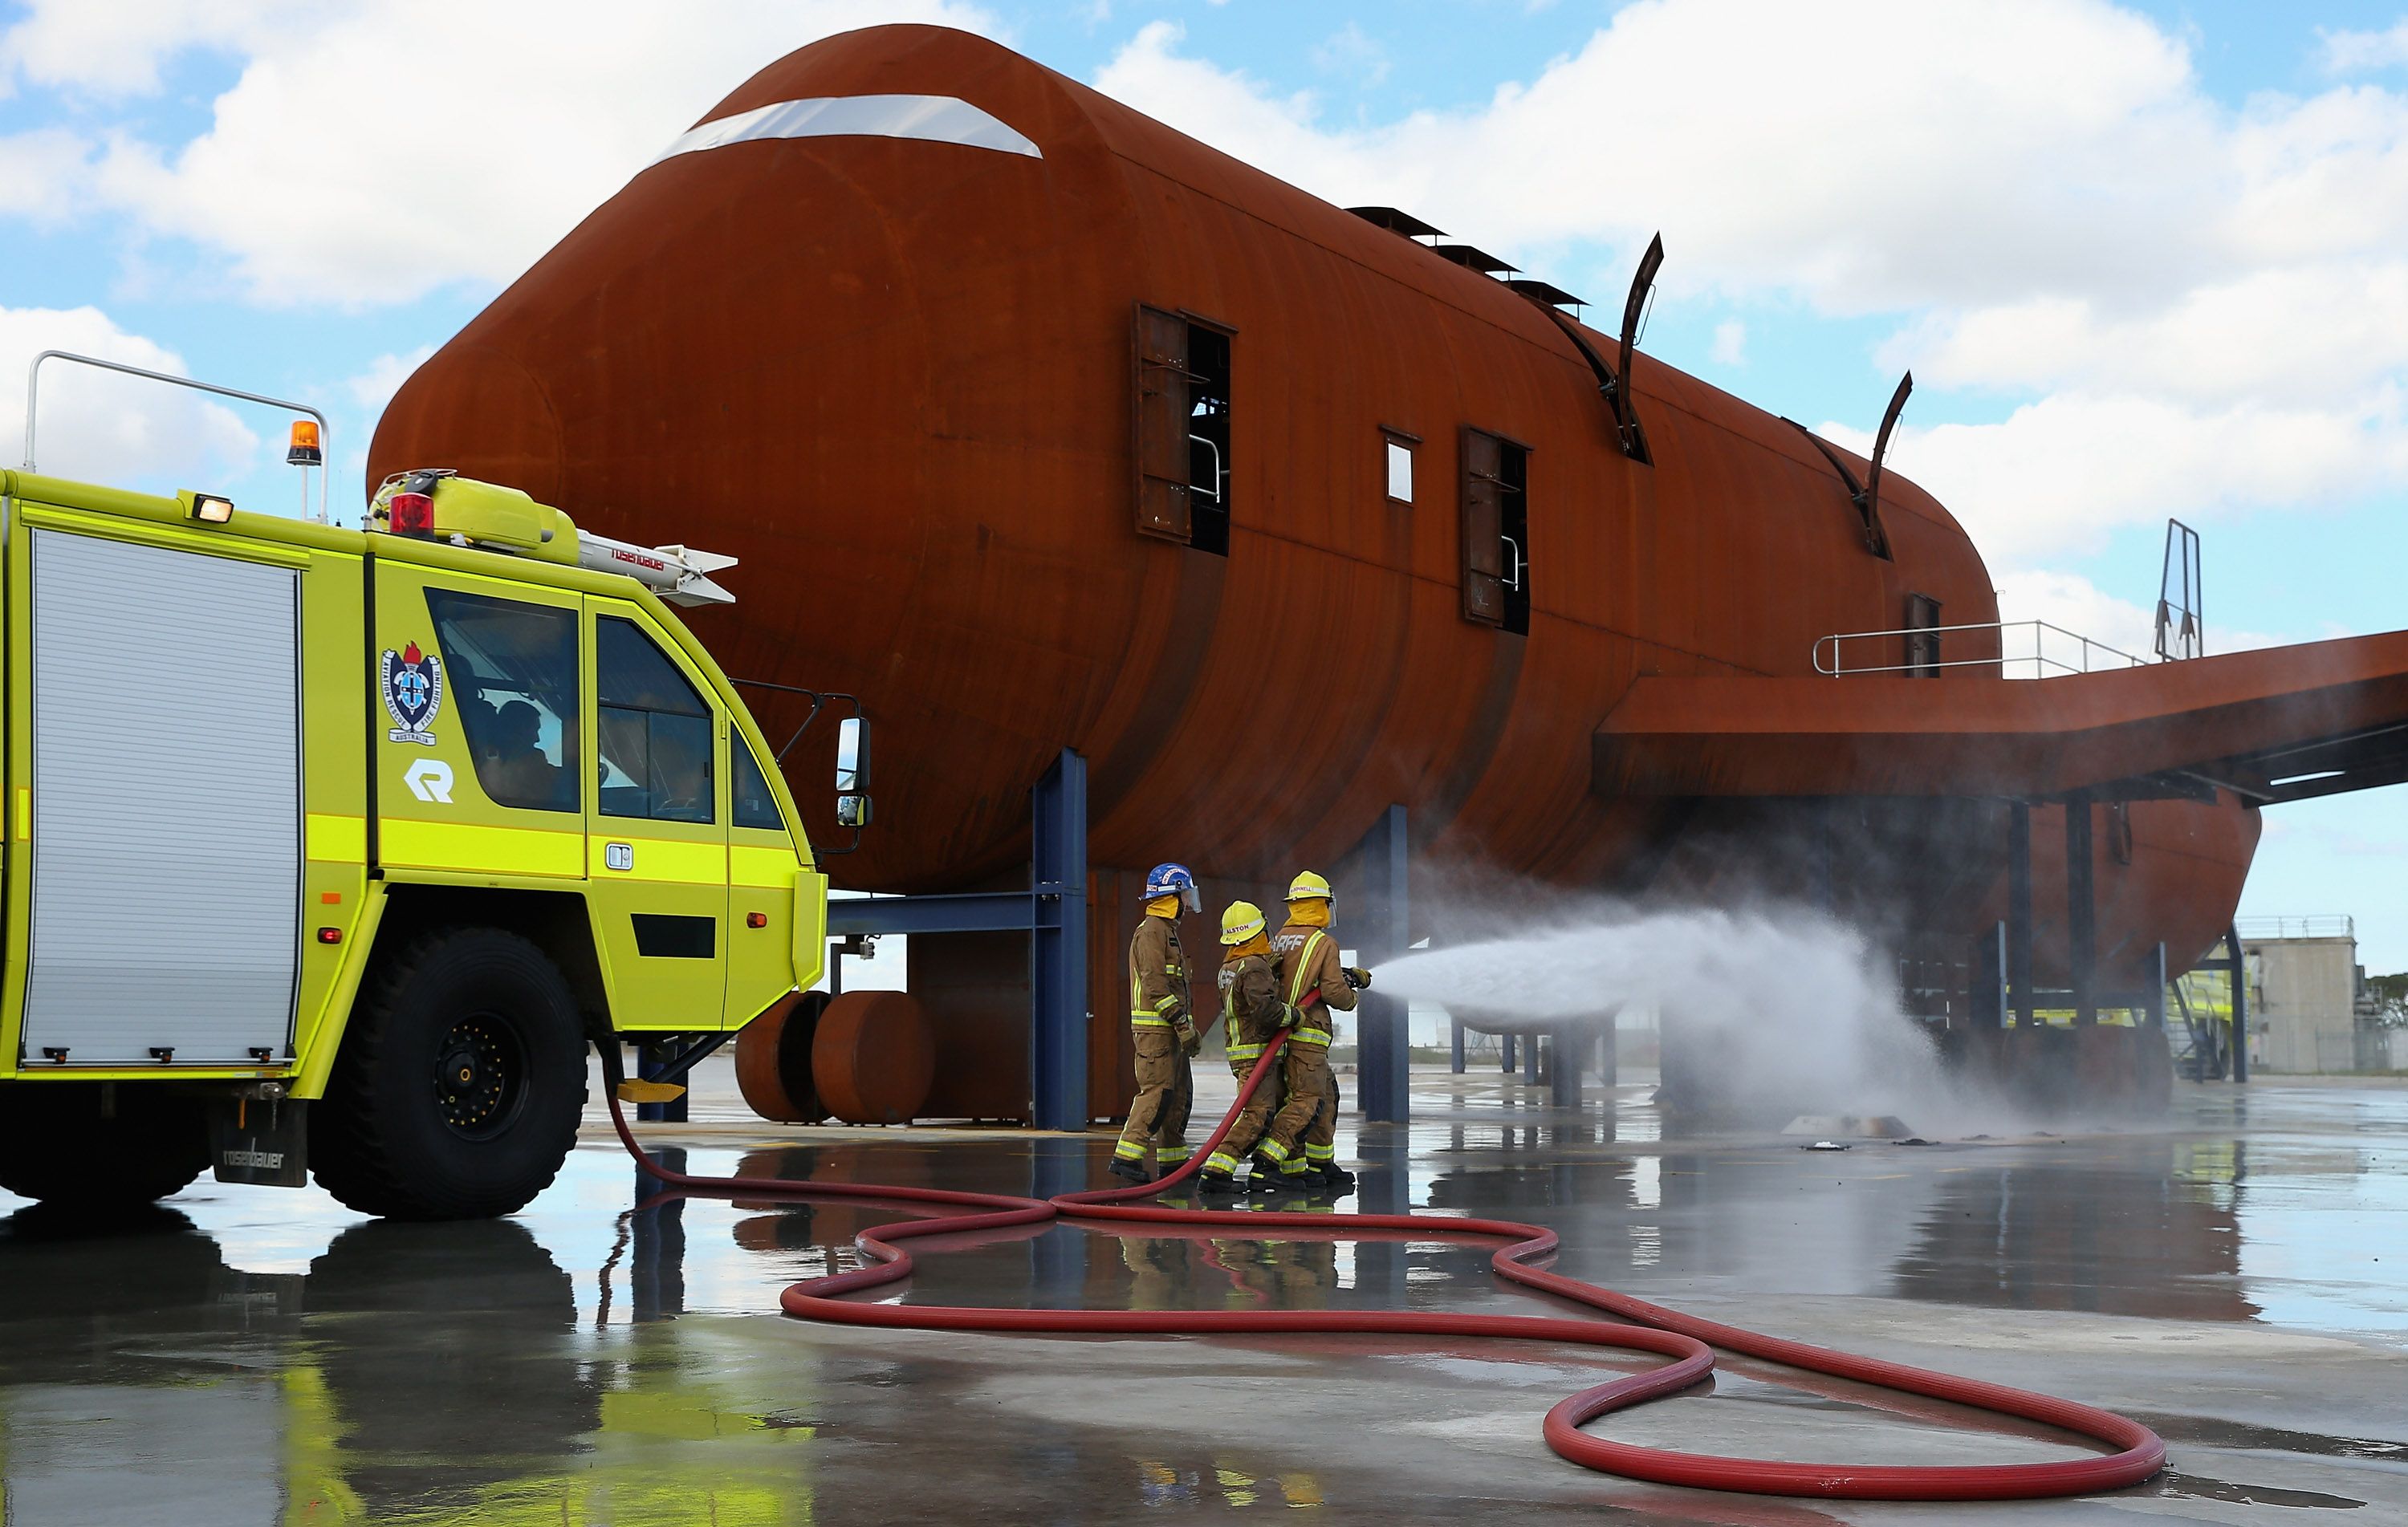 Fire fighters put on a demonstration at the Opening of Airservices Hot Fire Training Ground in Melbourne